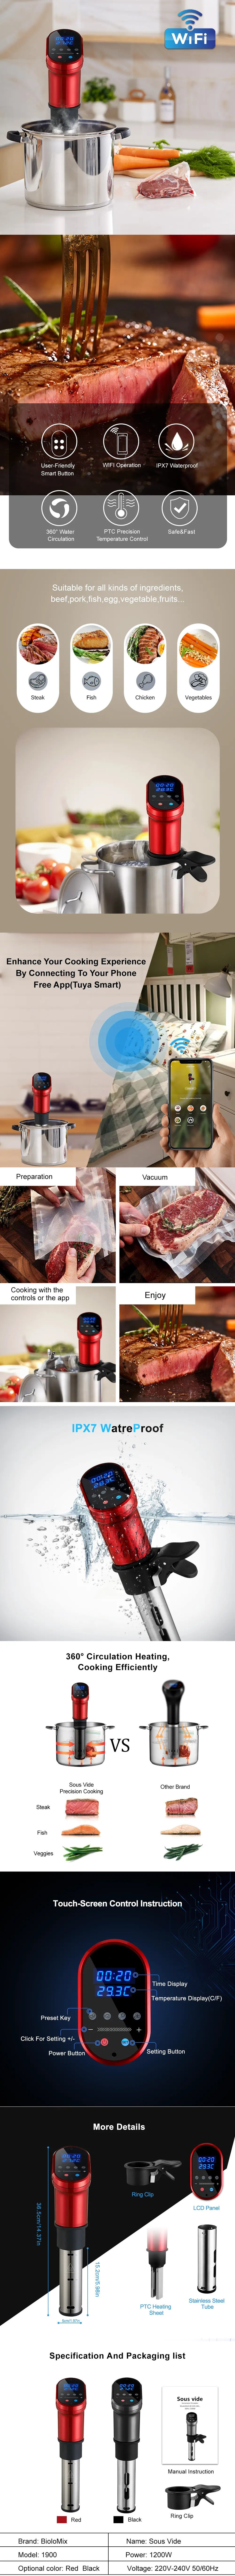 Sous Vide Precision Cooker With Wifi Control